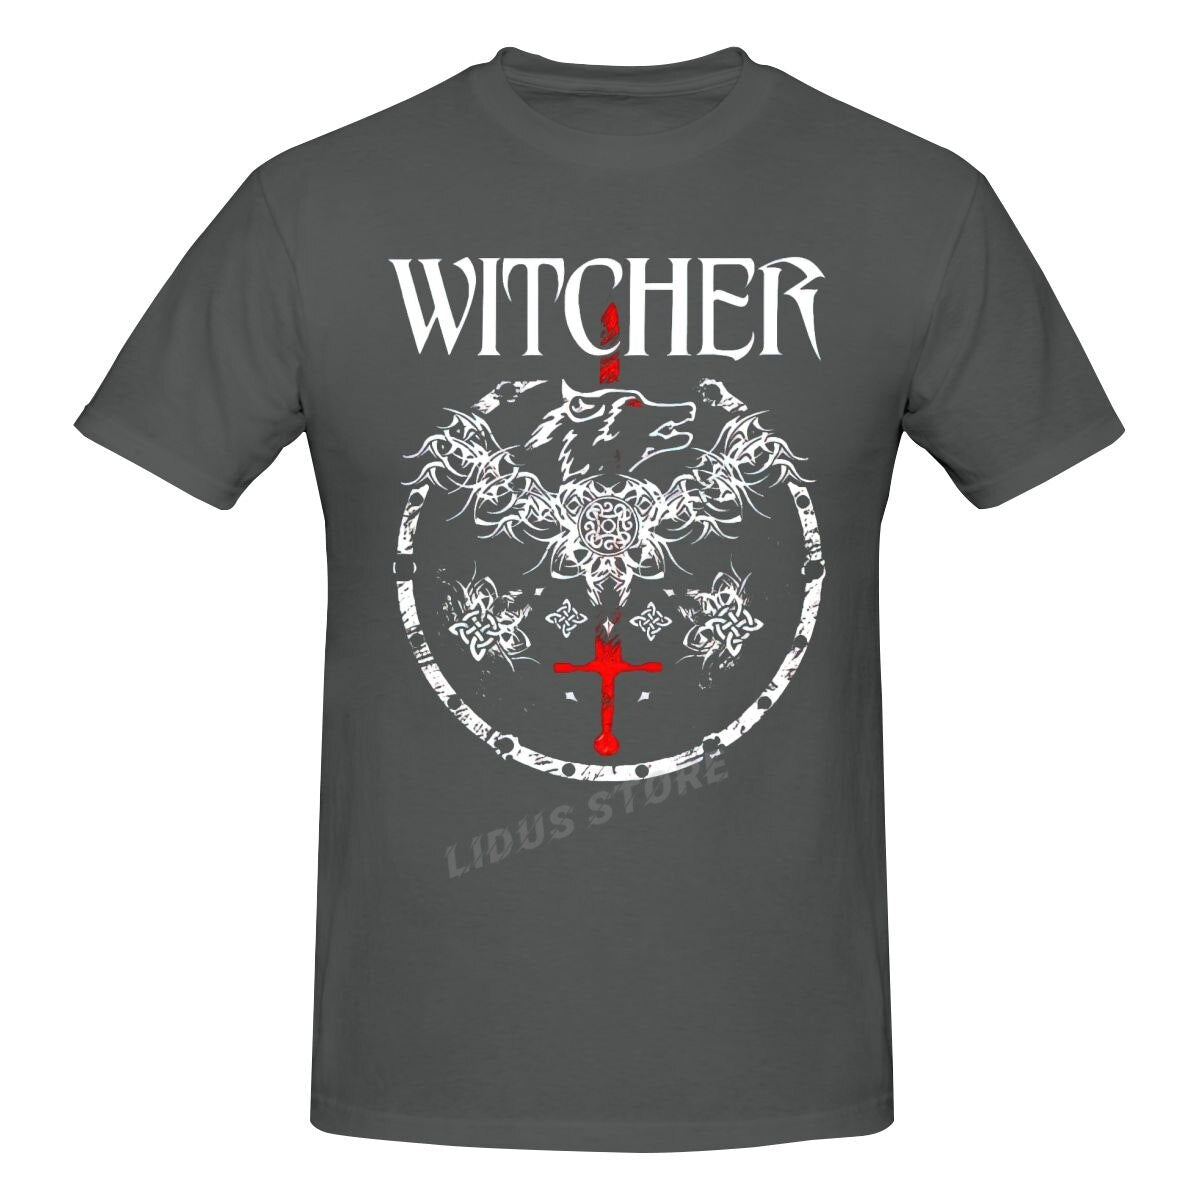 The Witcher T-Shirt Collection 2 (Variants Available)